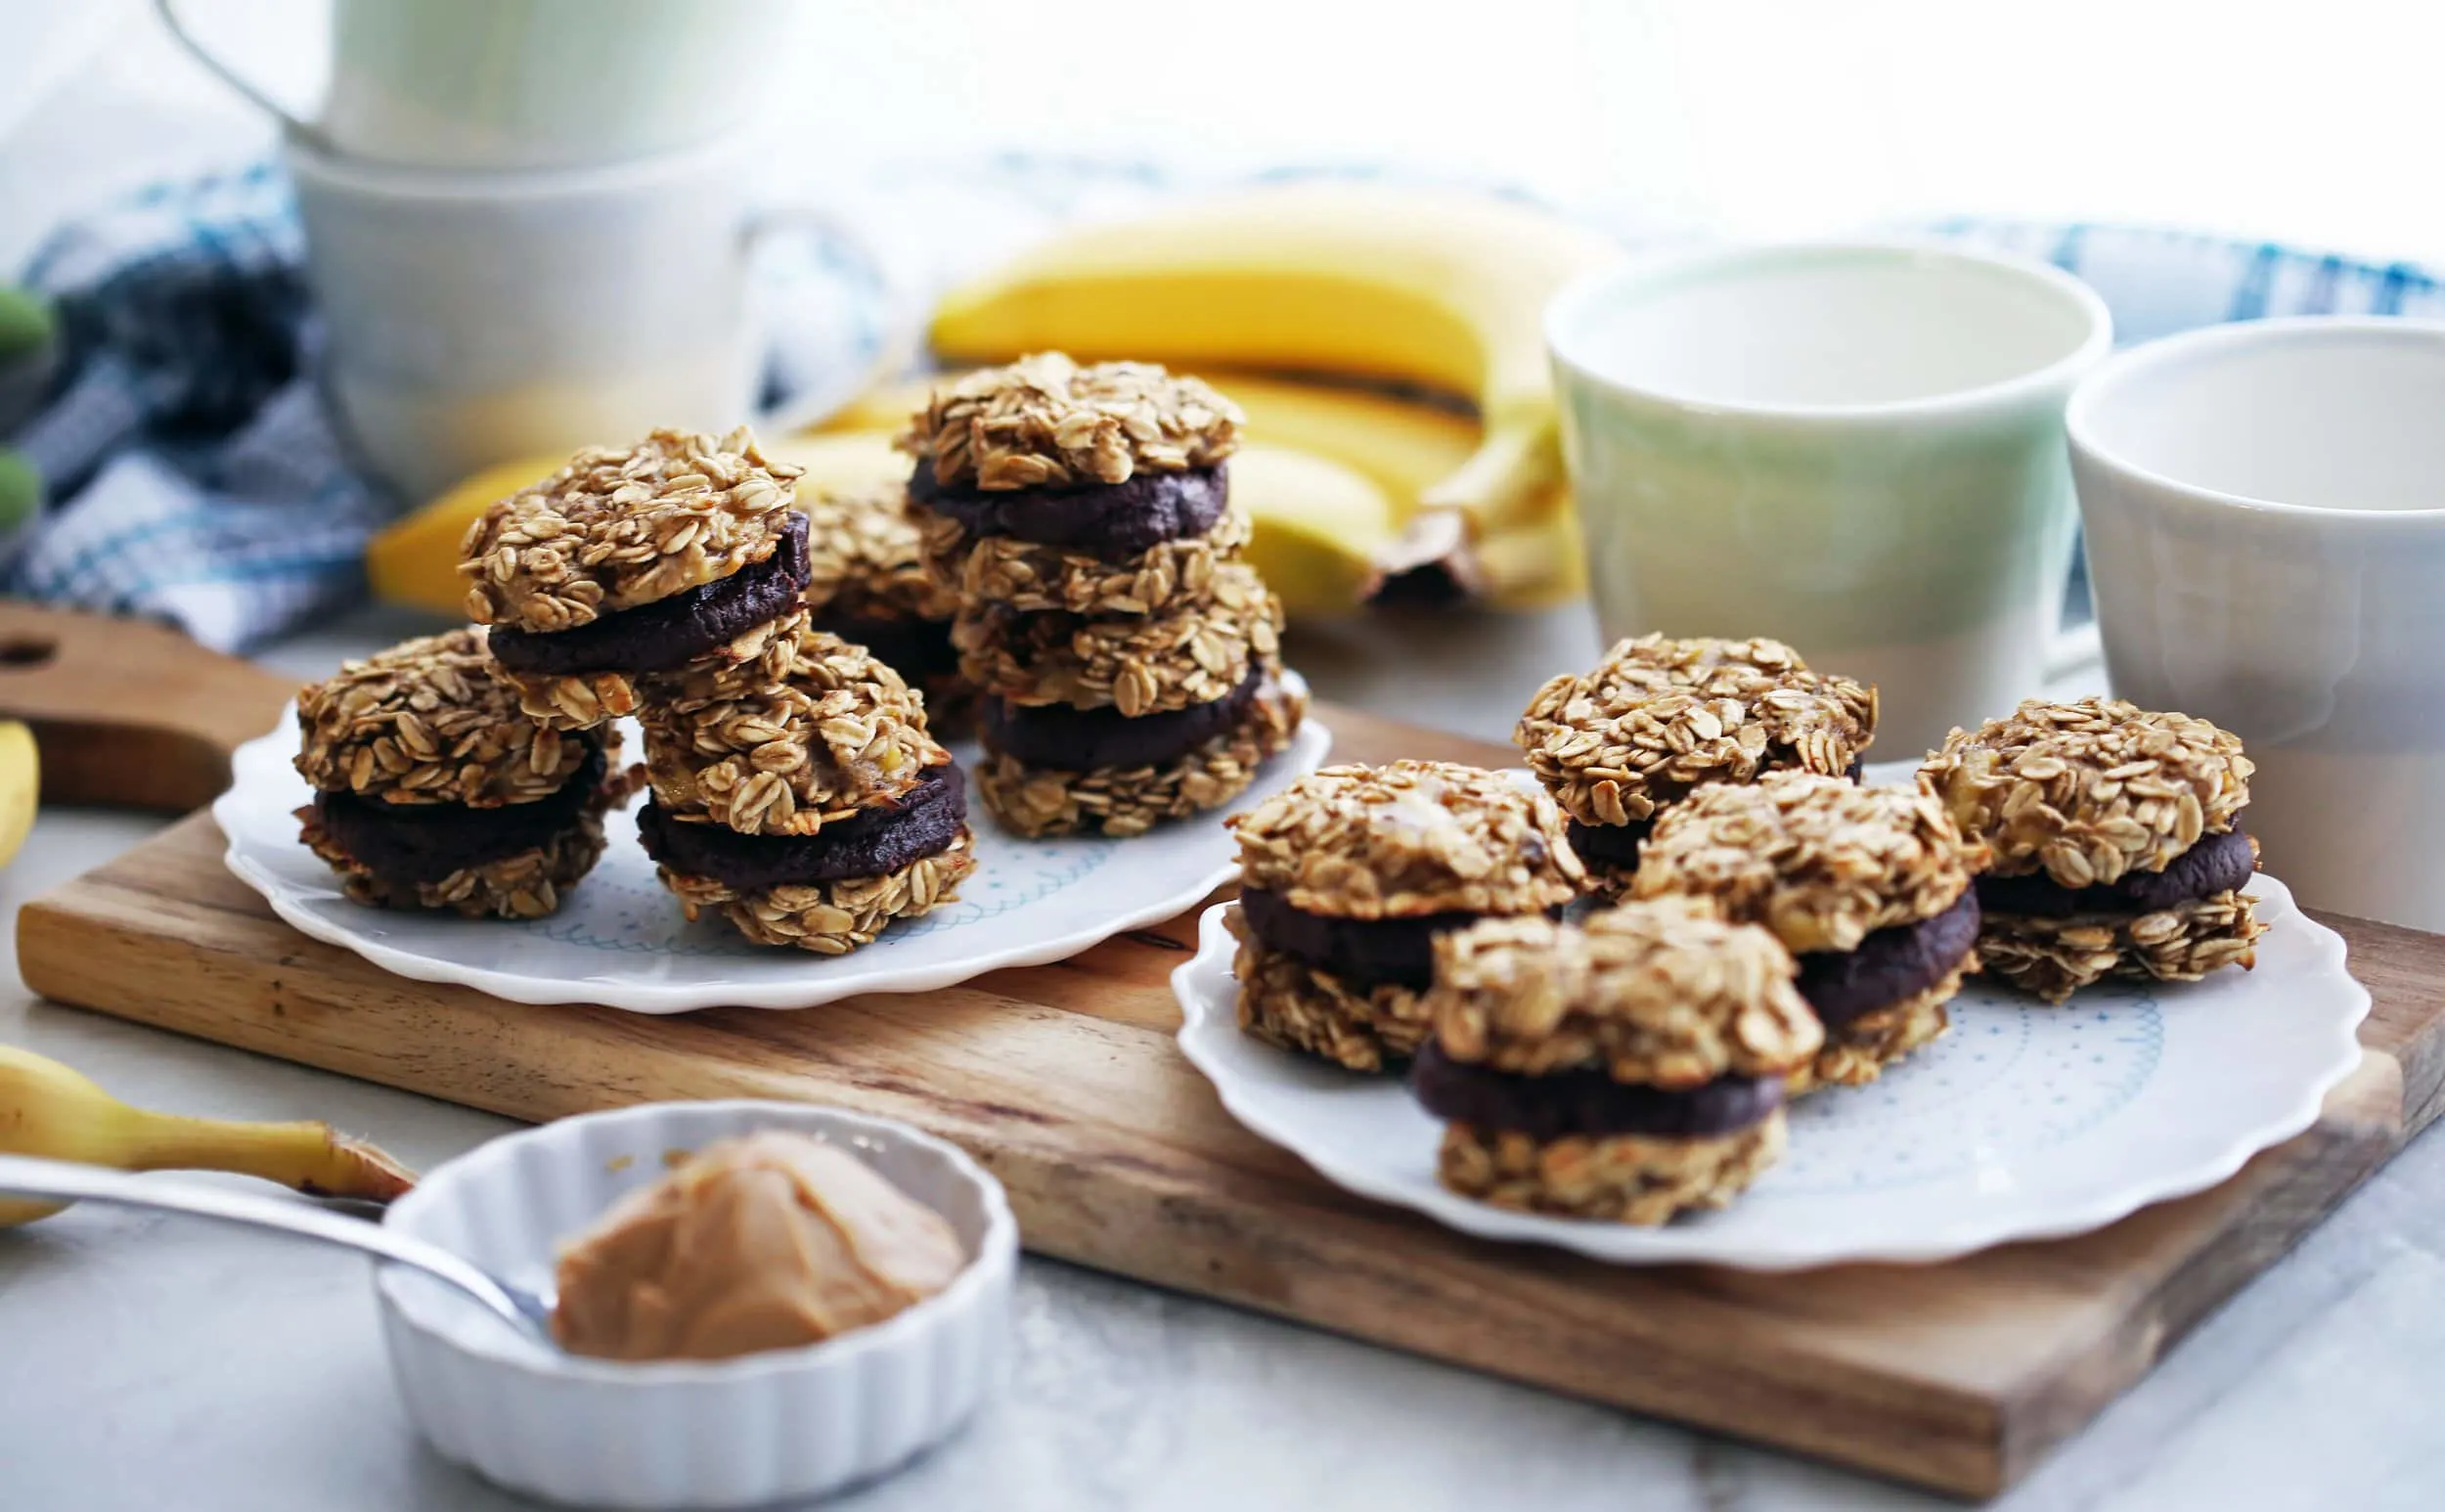 Two plates on a wooden board full of banana oatmeal sandwich cookies with peanut butter cocoa filling.